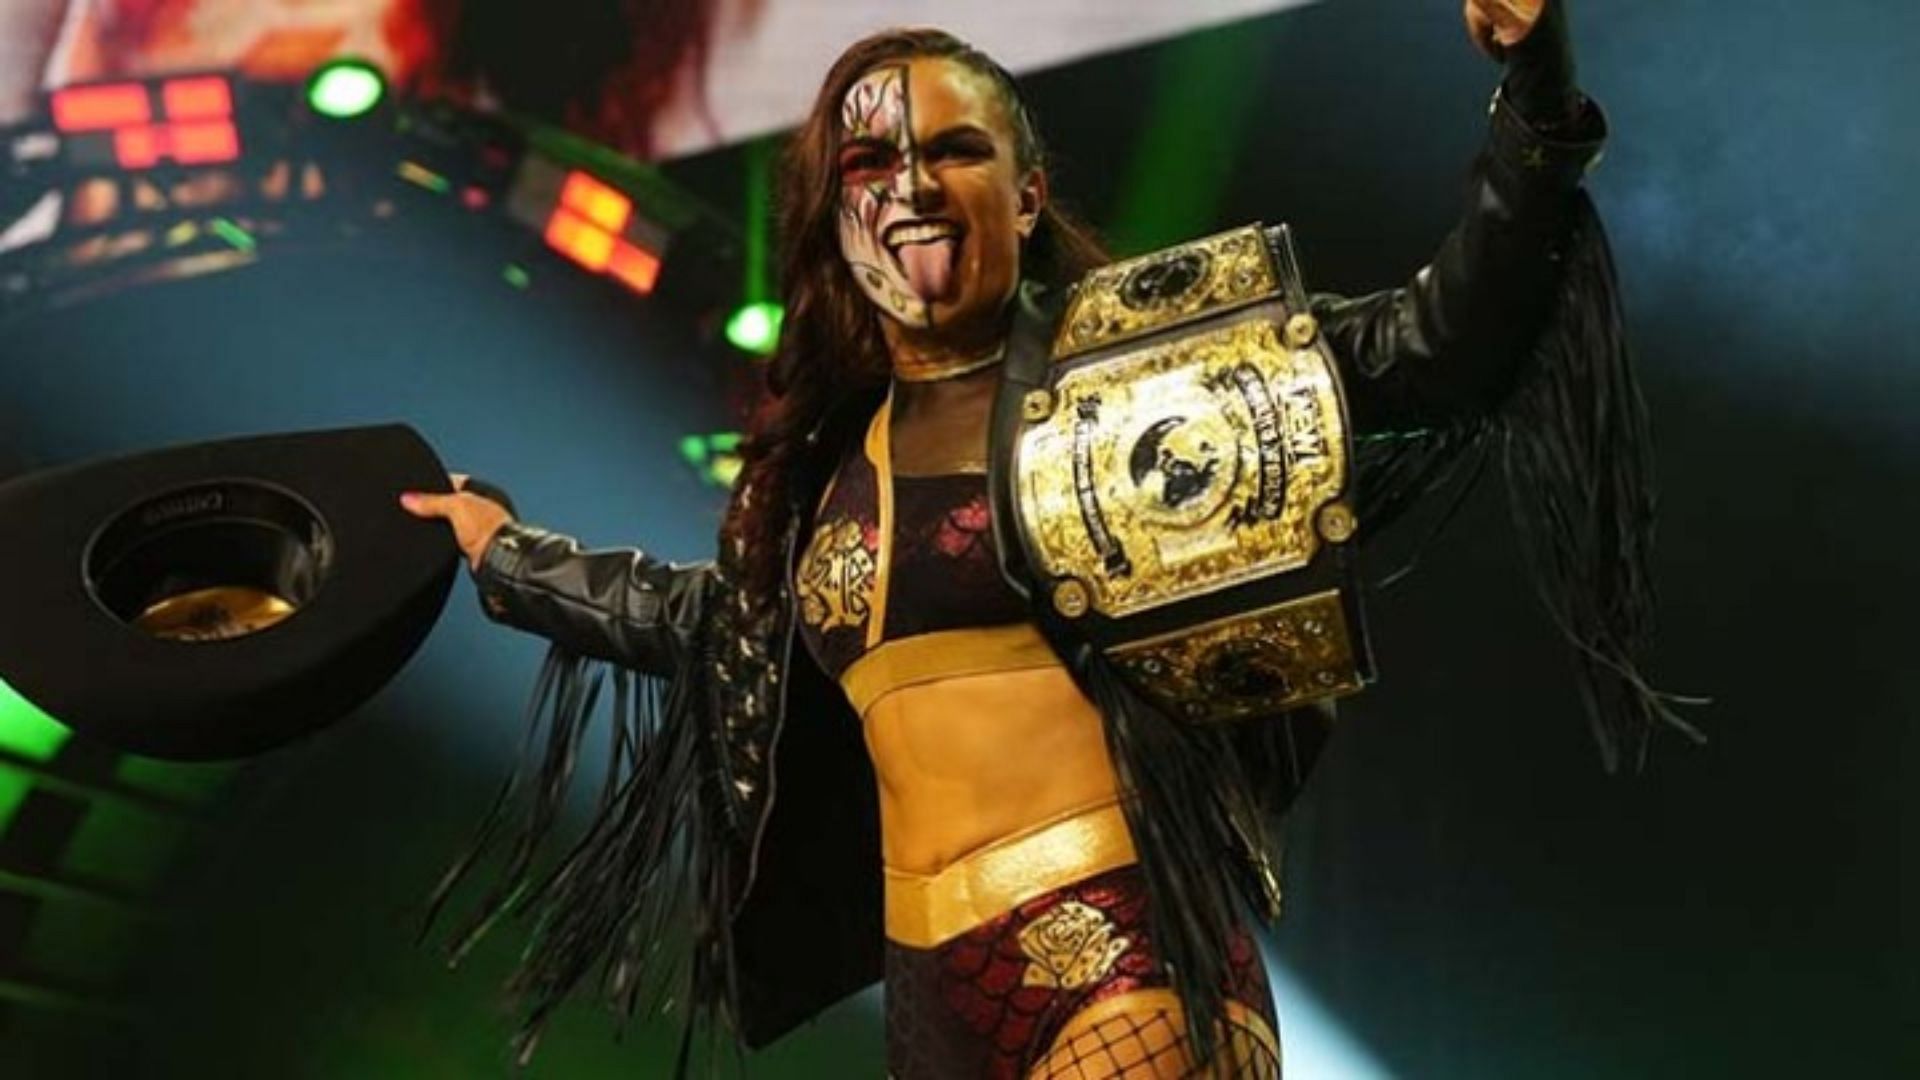 Thunder Rosa defended her title at Battle of the Belts III